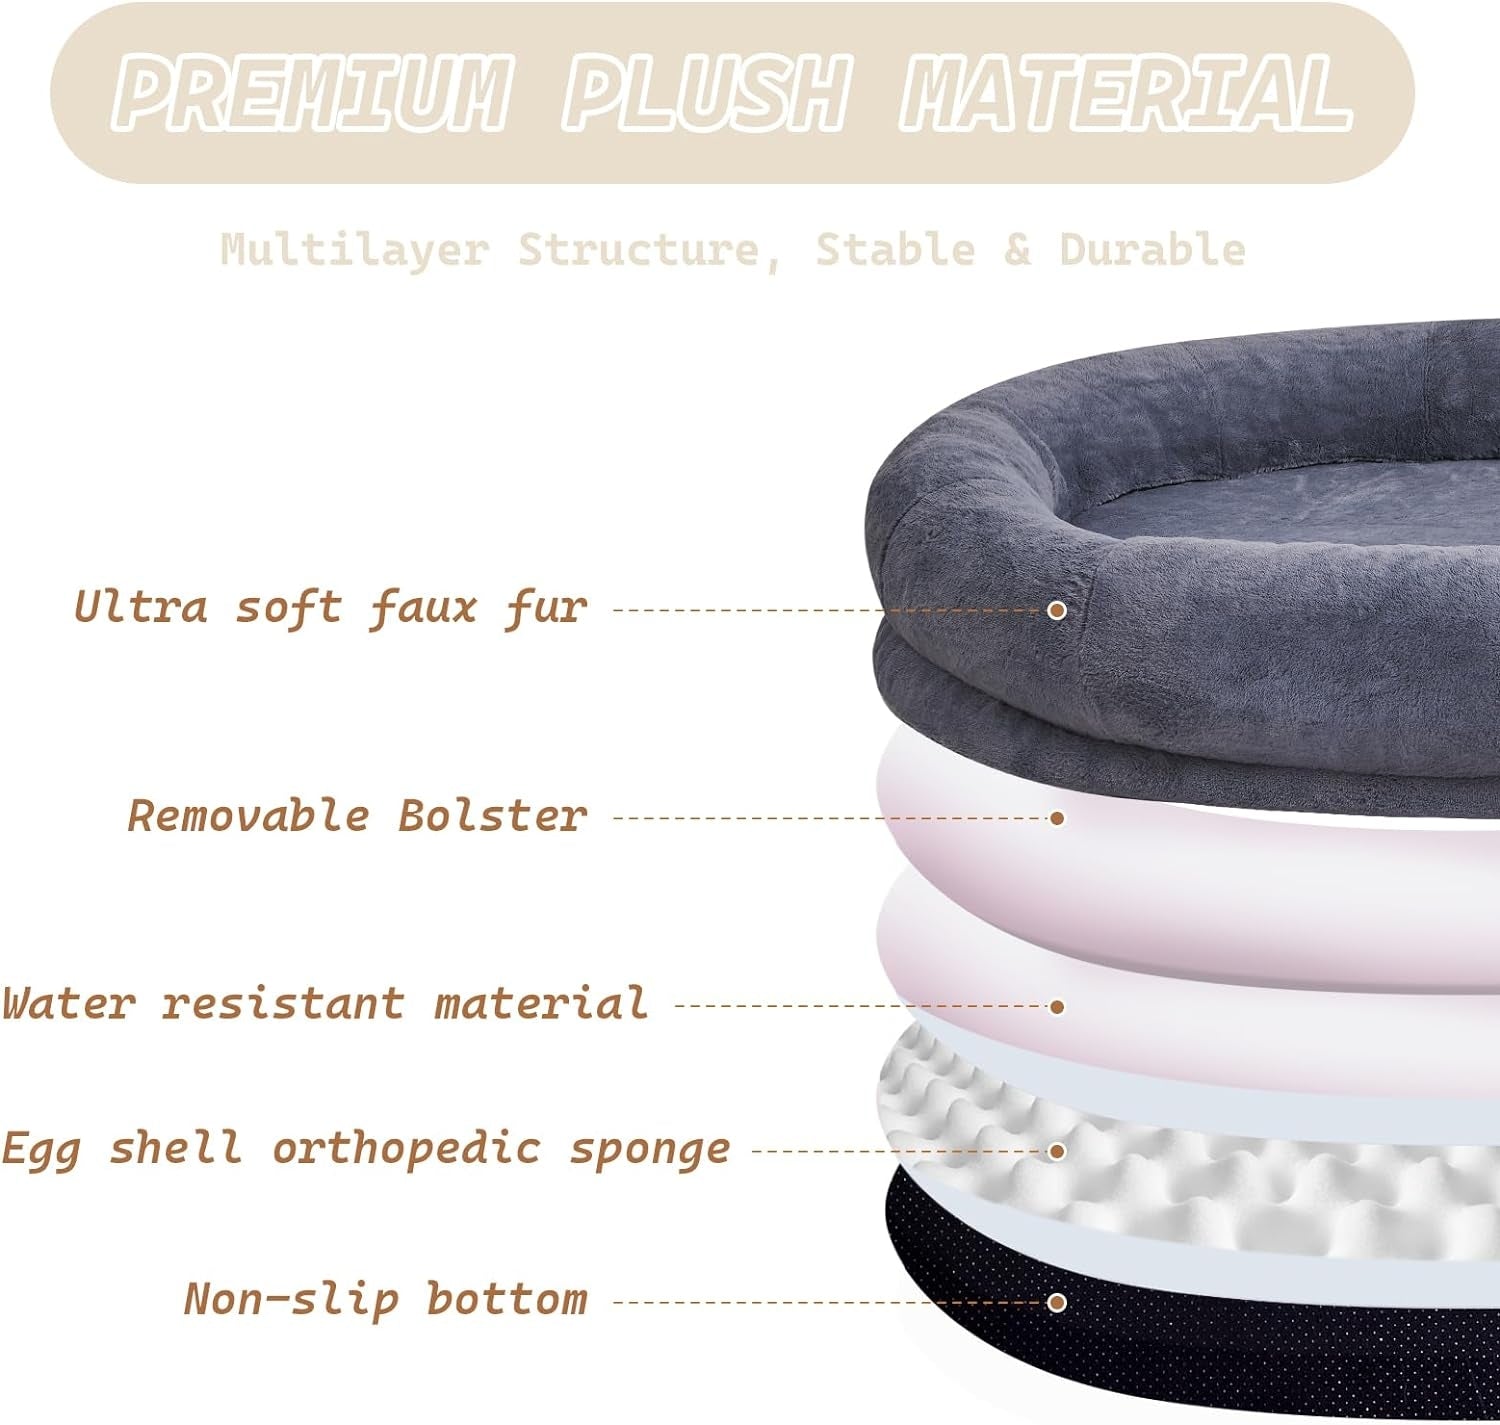 Giant Dog Bed for Humans is made from premium plush materia